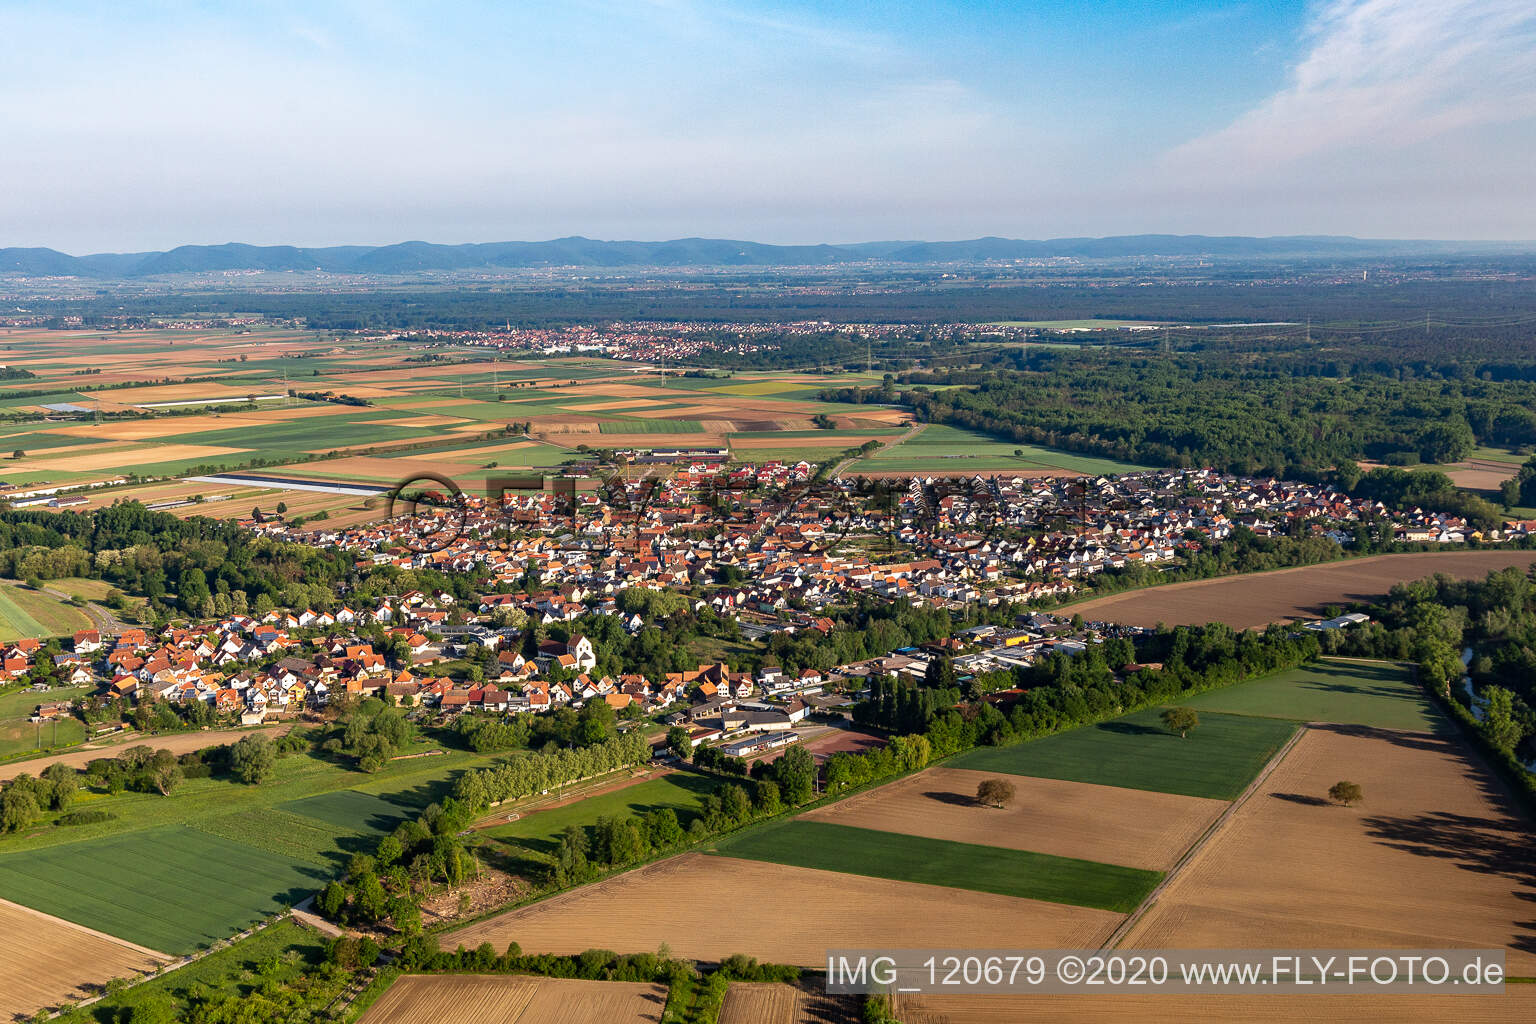 Village - view on the edge of agricultural fields and farmland in Hoerdt in the state Rhineland-Palatinate